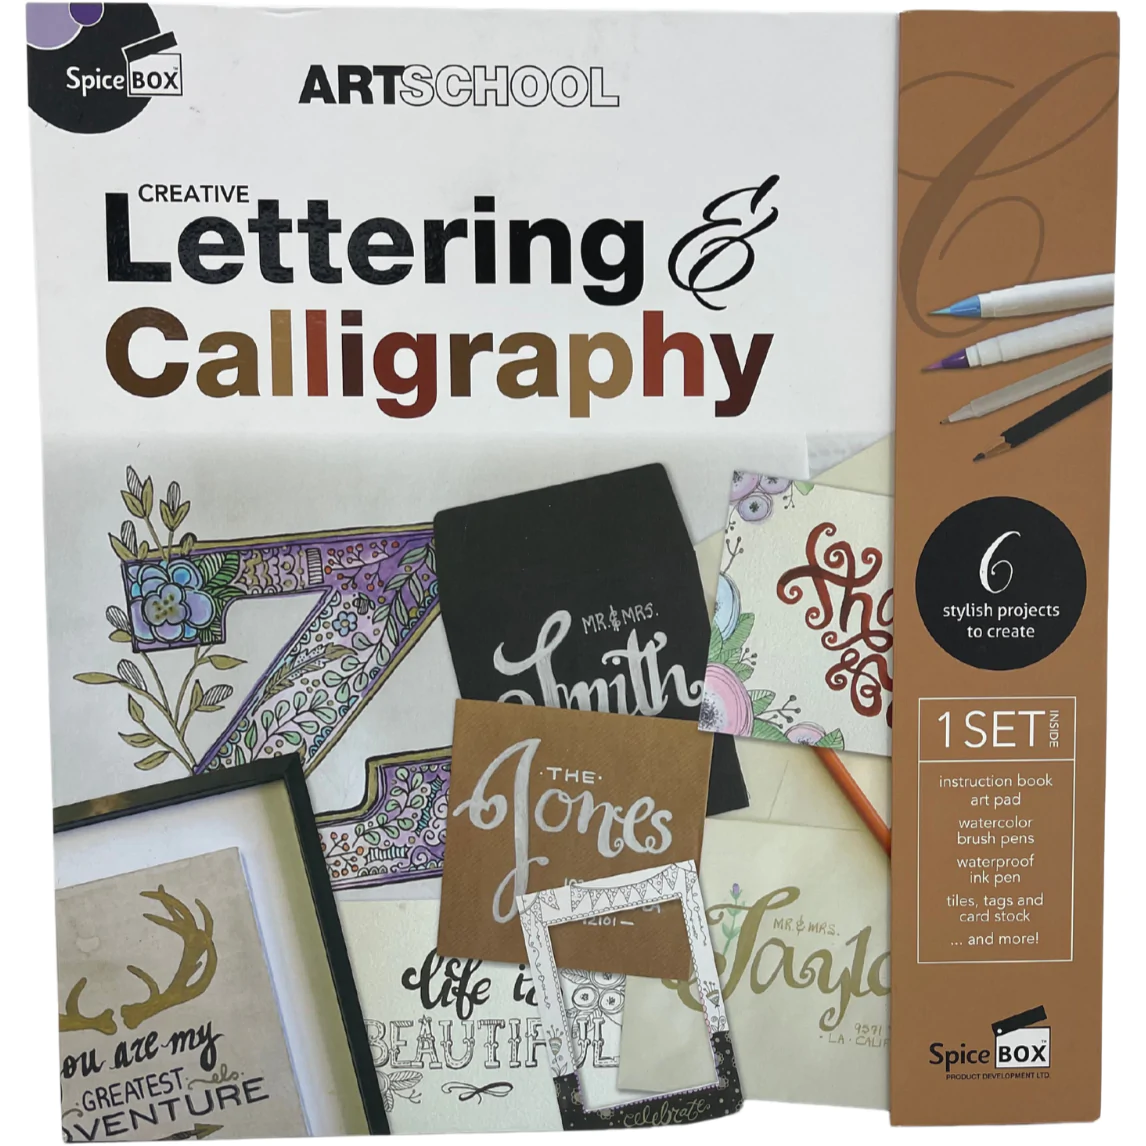 Spice Box Creative Lettering and Calligraphy Set / "How To" Book / DIY Writing / Kid's Craft Kit **DEALS**